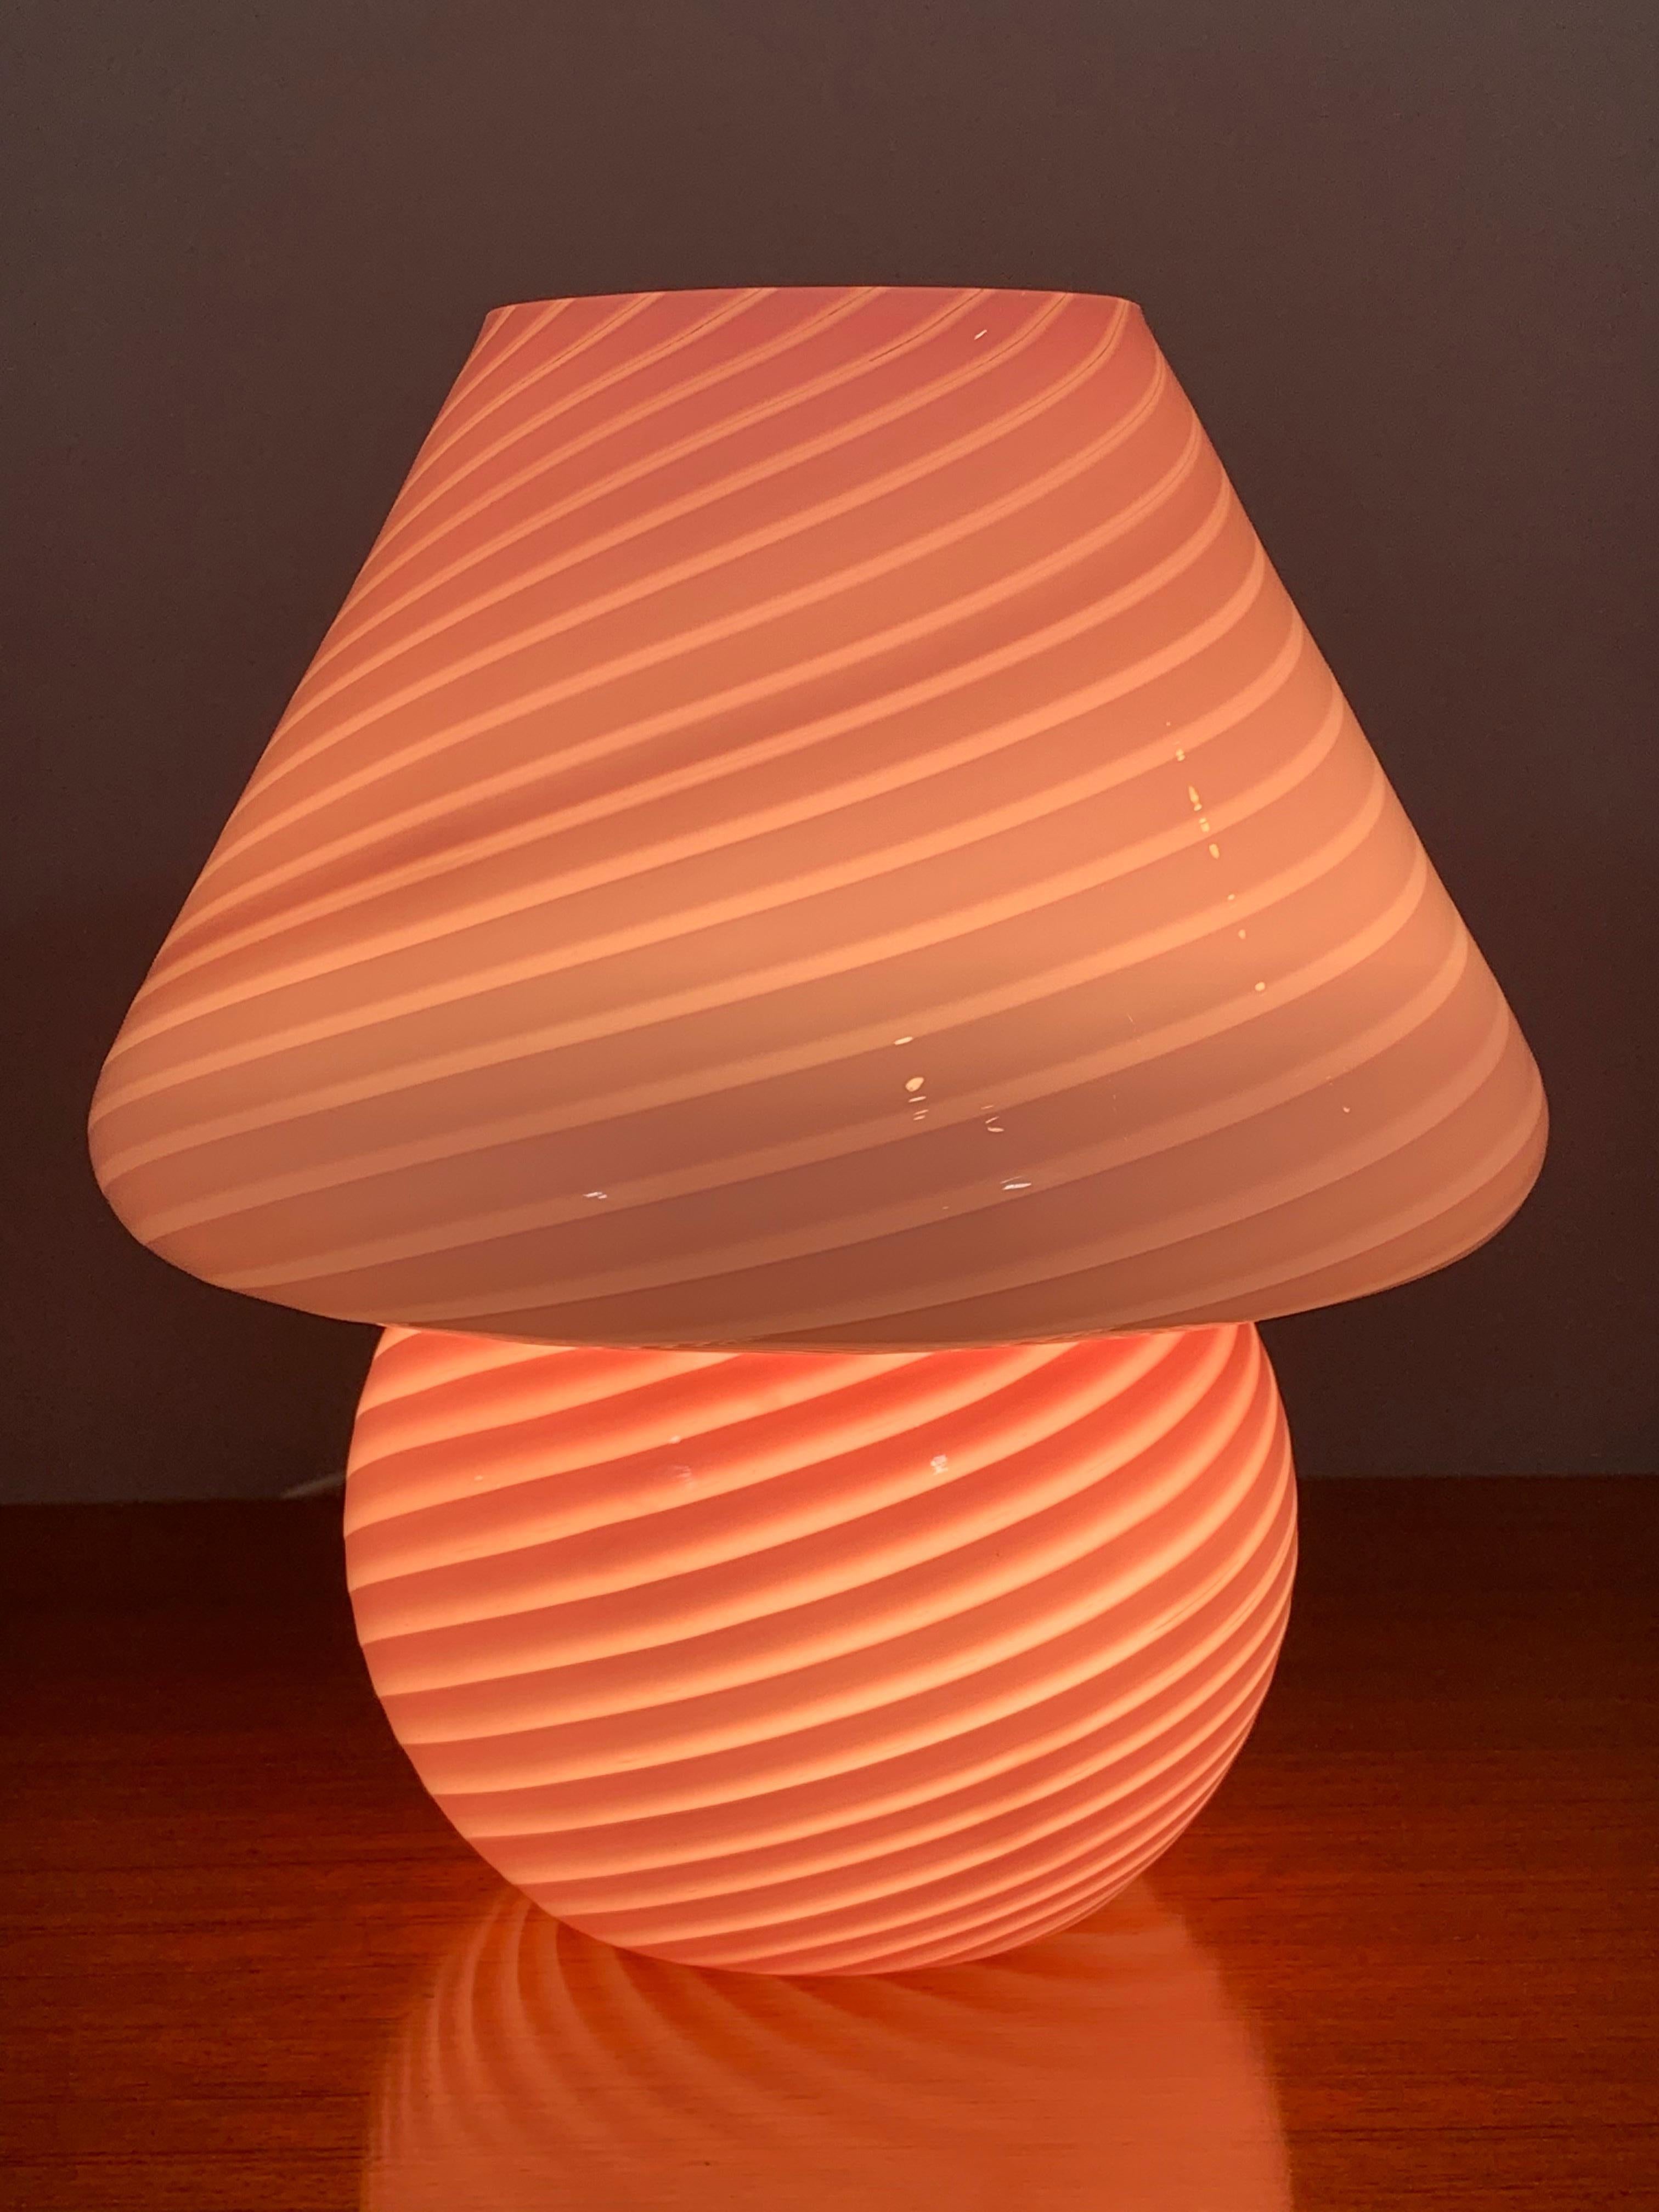 A 1960s Italian table lamp by Vetri d‘Arte Murano. The lamp is made from one piece of hand blown pink glass in an unusual mushroom shape with a white swirled design around its entire surface. In very good vintage condition. Part of the original